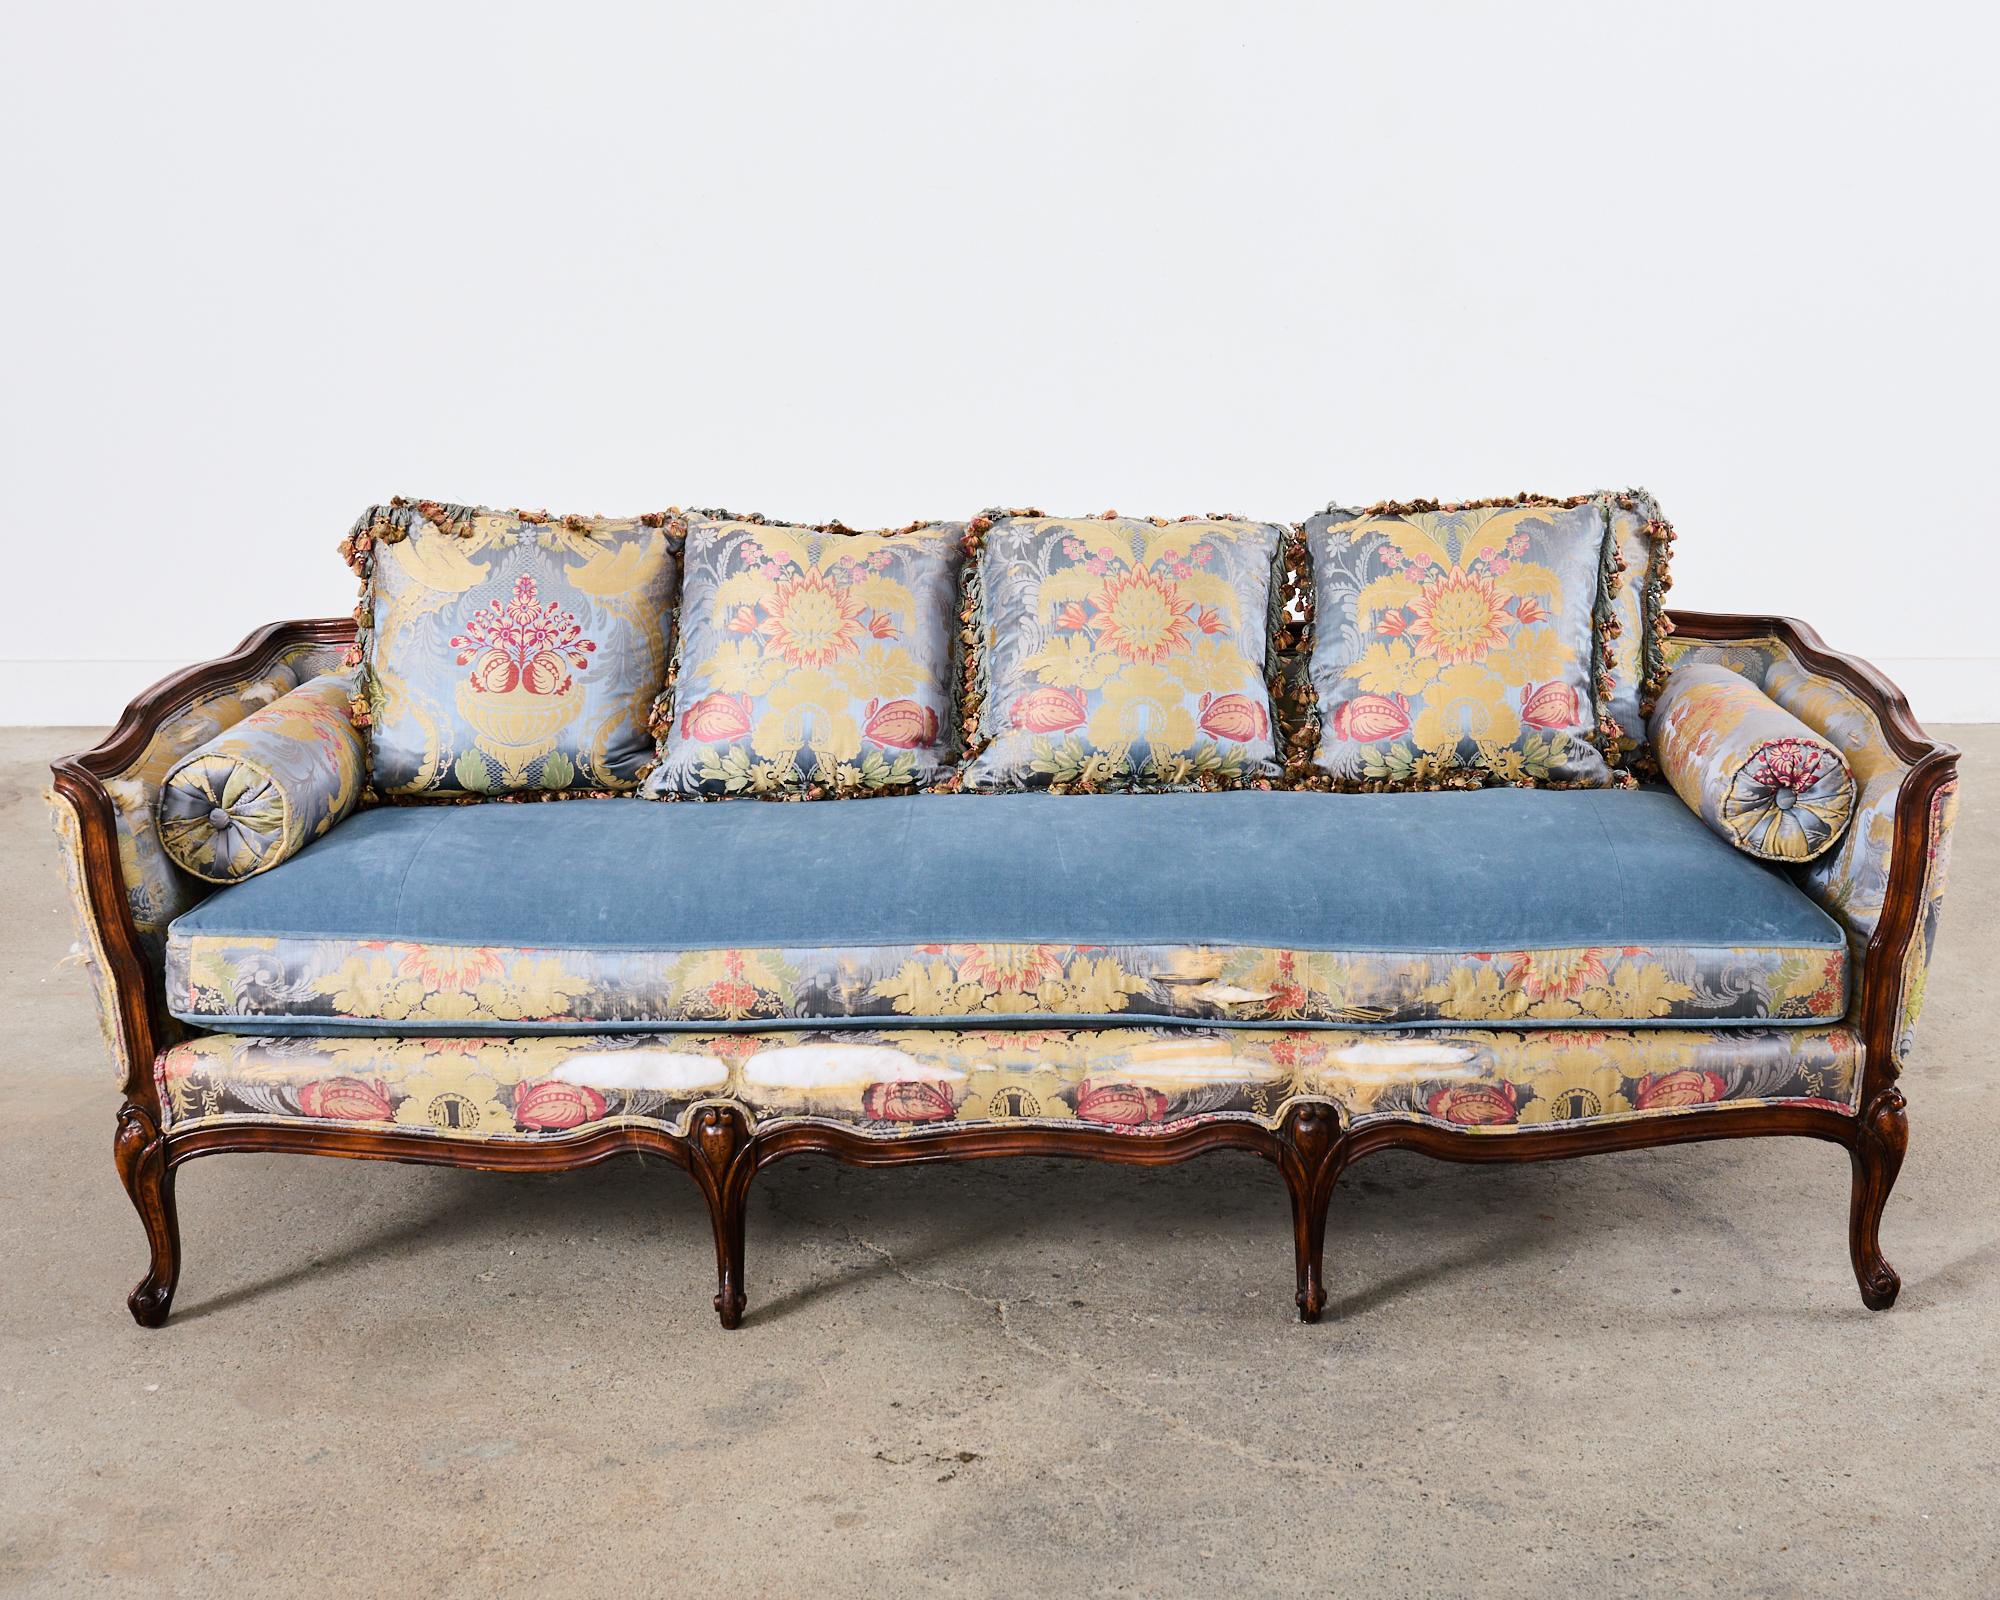 Hand-Crafted French Provincial Louis XV Style Serpentine Canape Sofa Settee For Sale